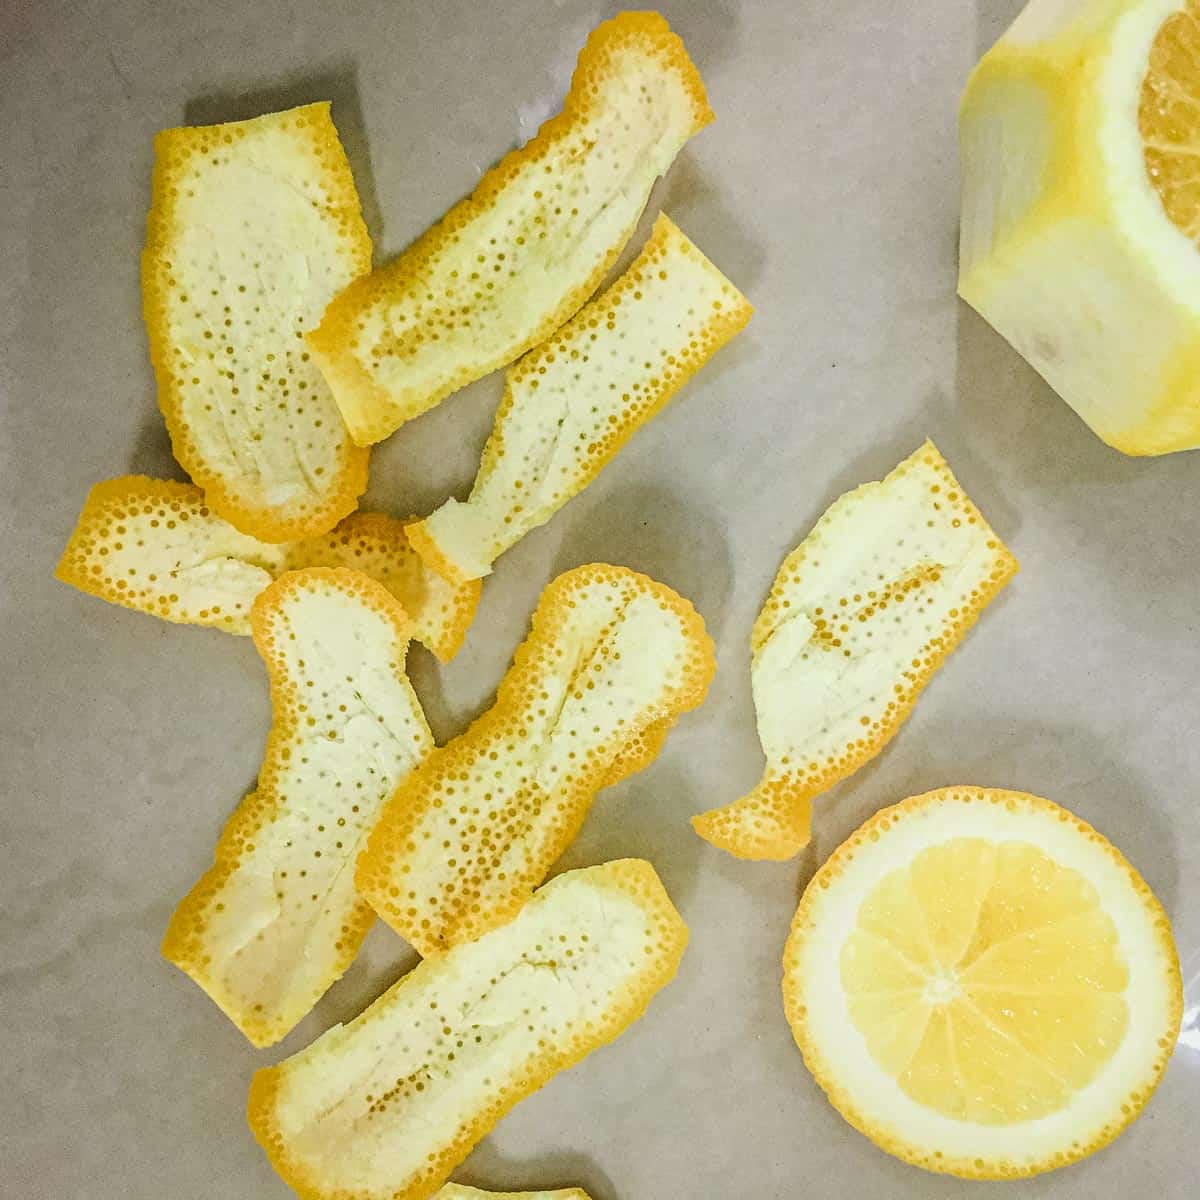 Slices of citrus skin with the white pith removed.